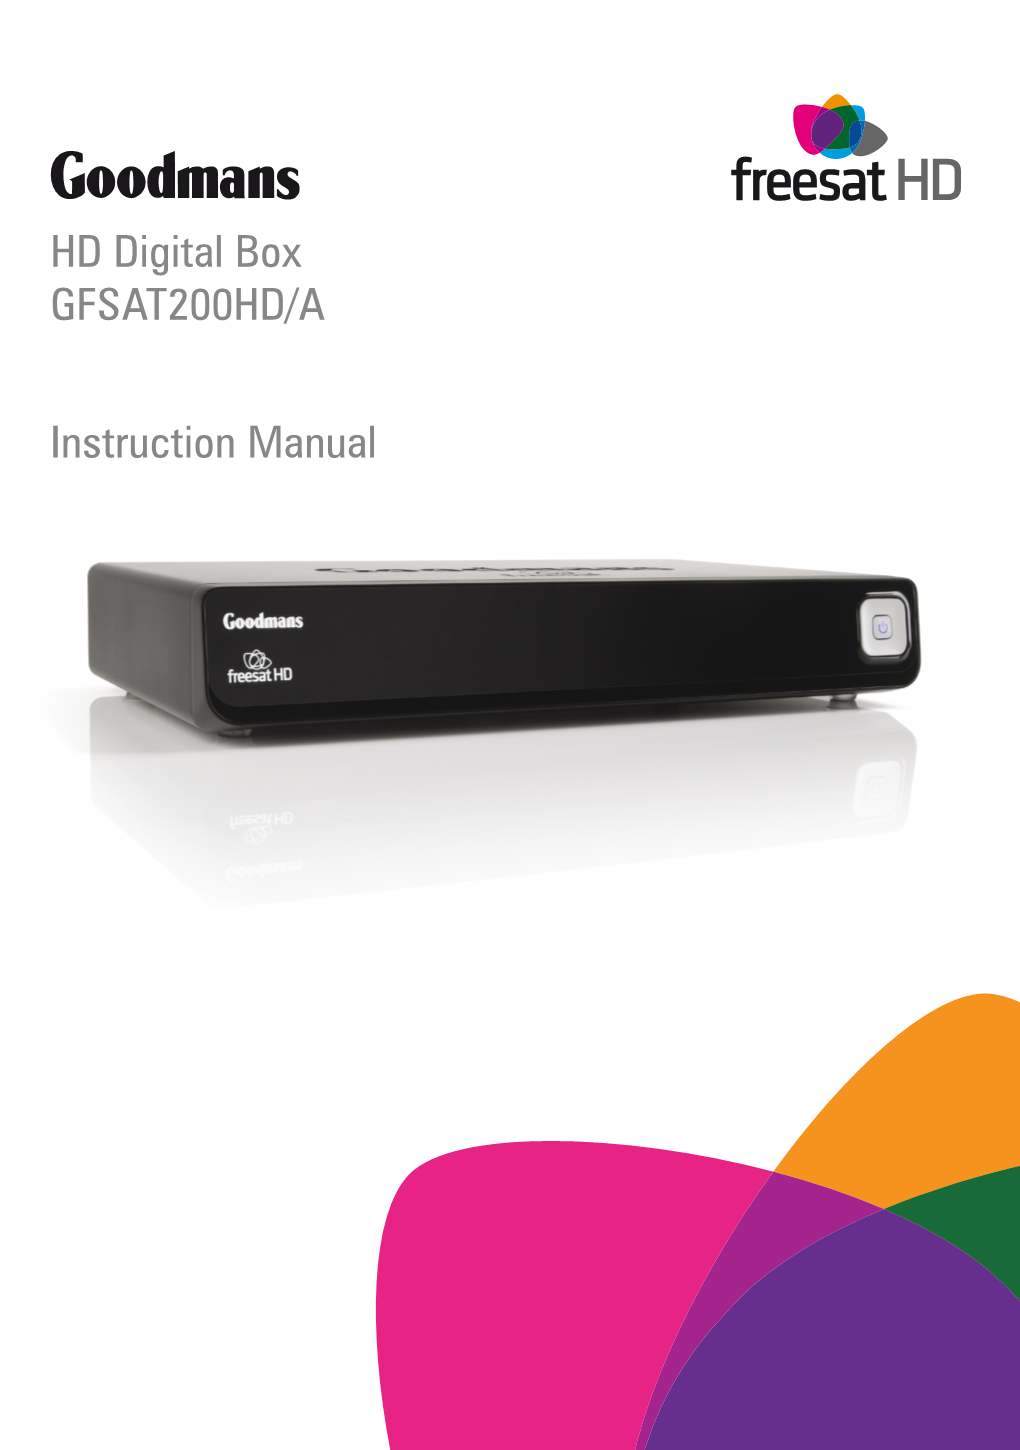 HD Digital Box GFSAT200HD/A Instruction Manual Welcome to Your